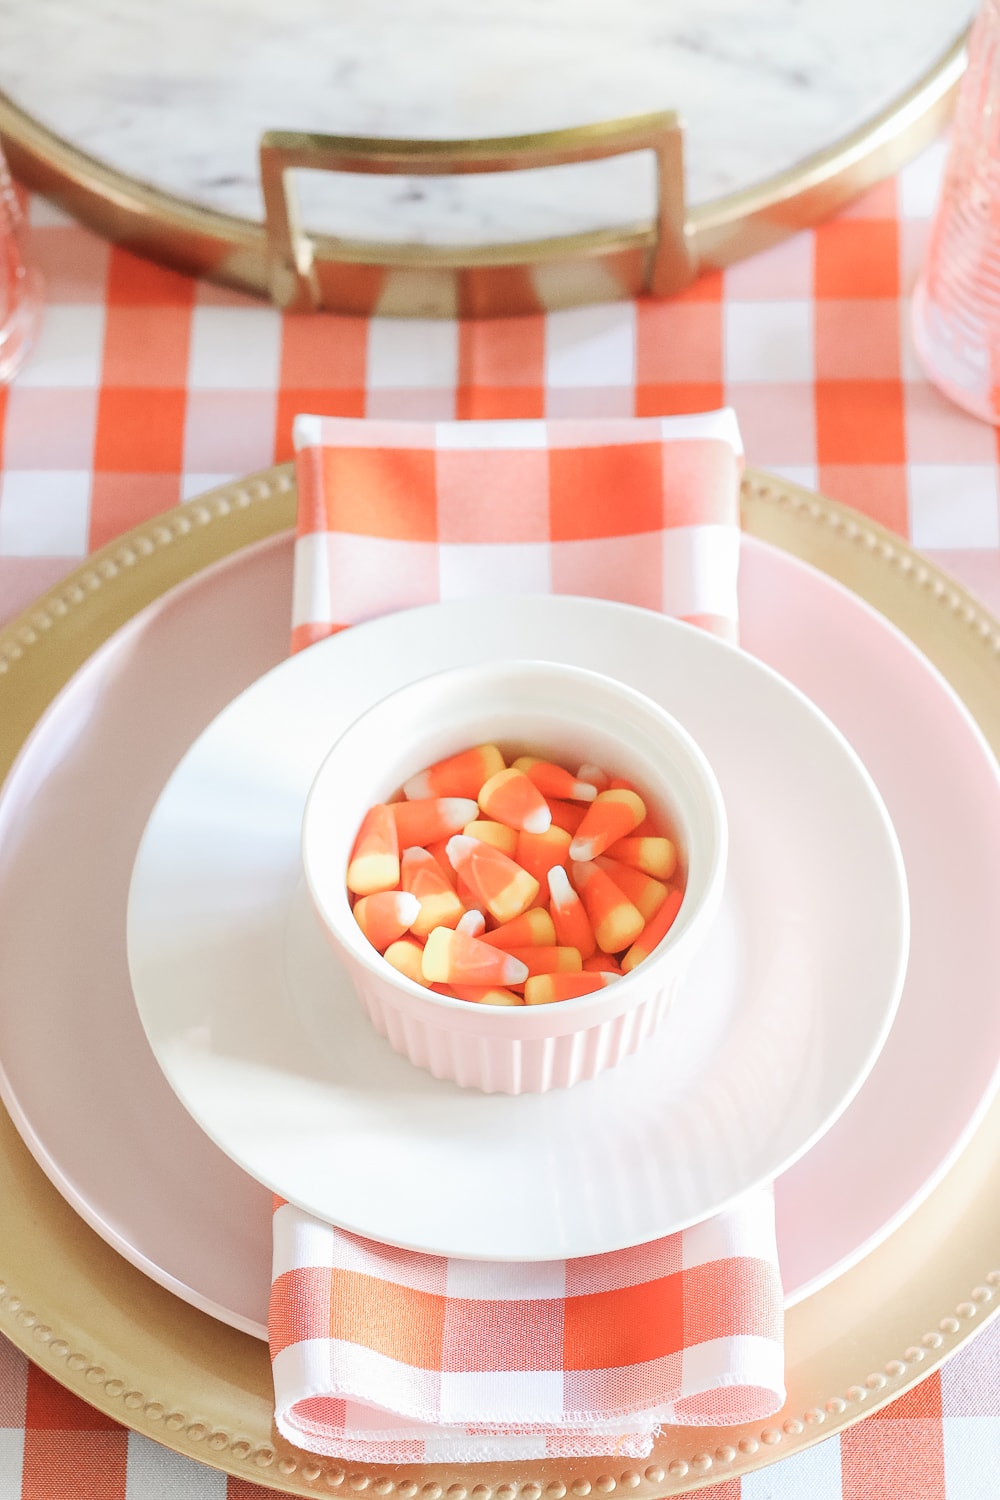 Simple Halloween tablescape ideas by southern blogger Stephanie Ziajka on Diary of a Debutante